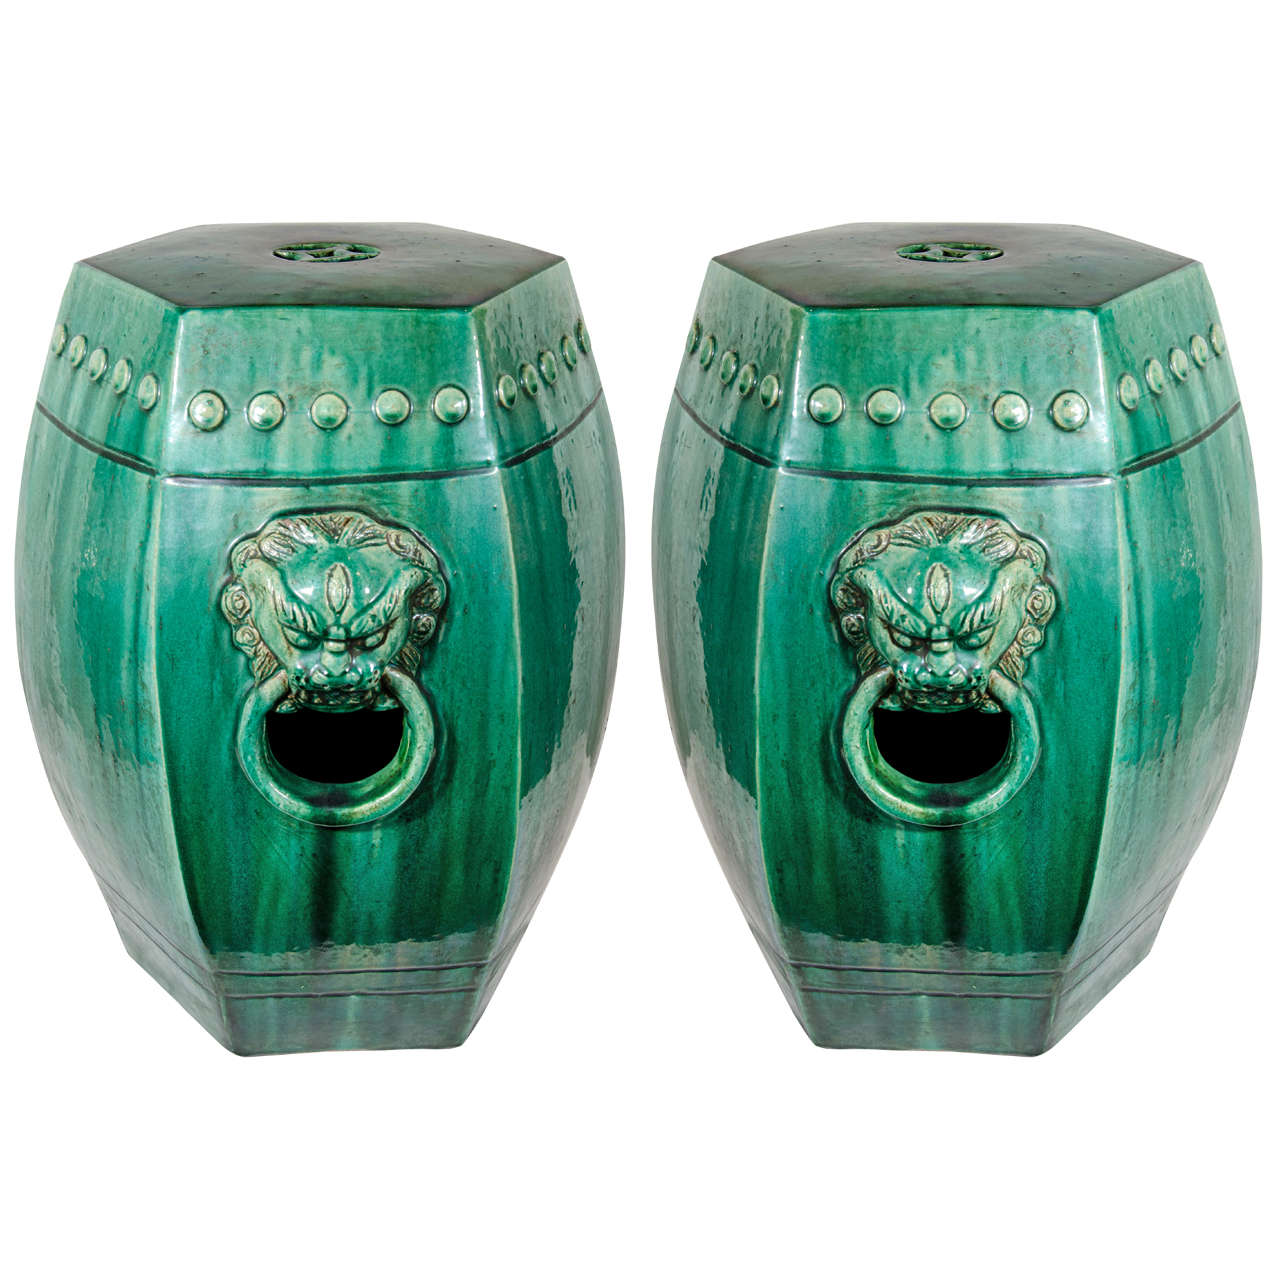 Pair of Chinese Green Glazed Garden Seats